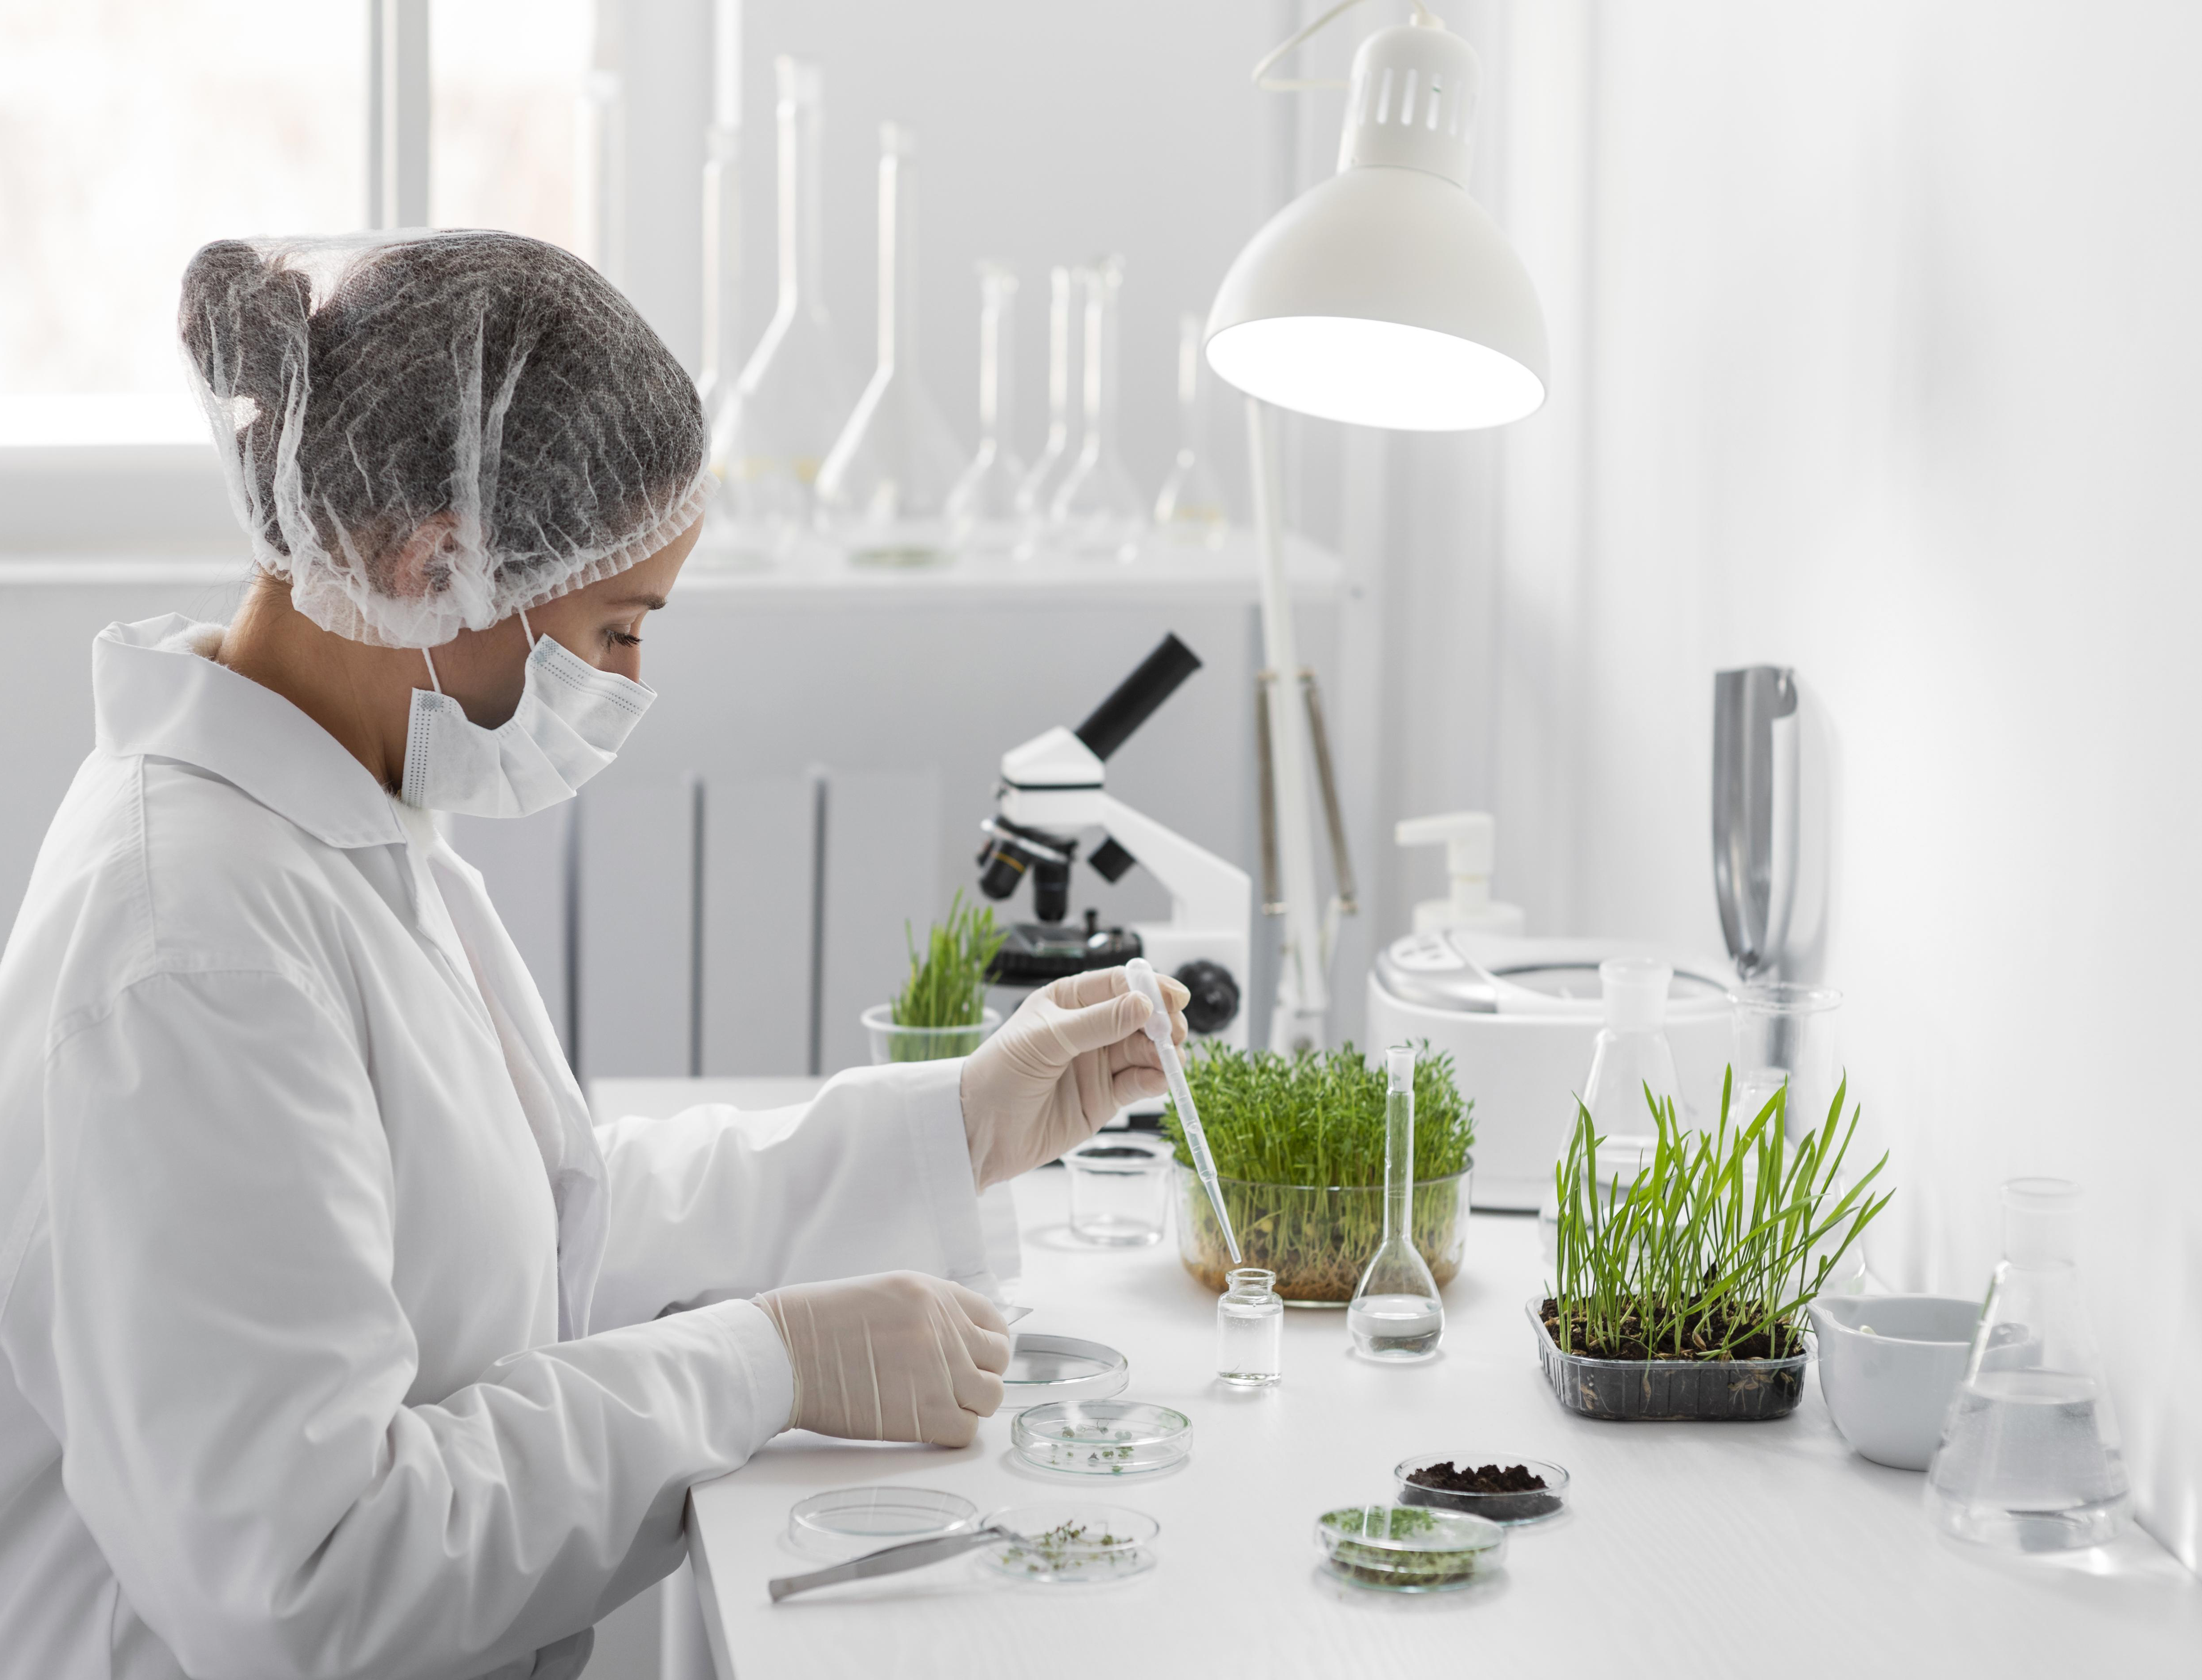 PREPARATION OF ADAPTED PROTOCOLS FOR PLANT GROWTH, PROPAGATION AND TISSUE CULTURE